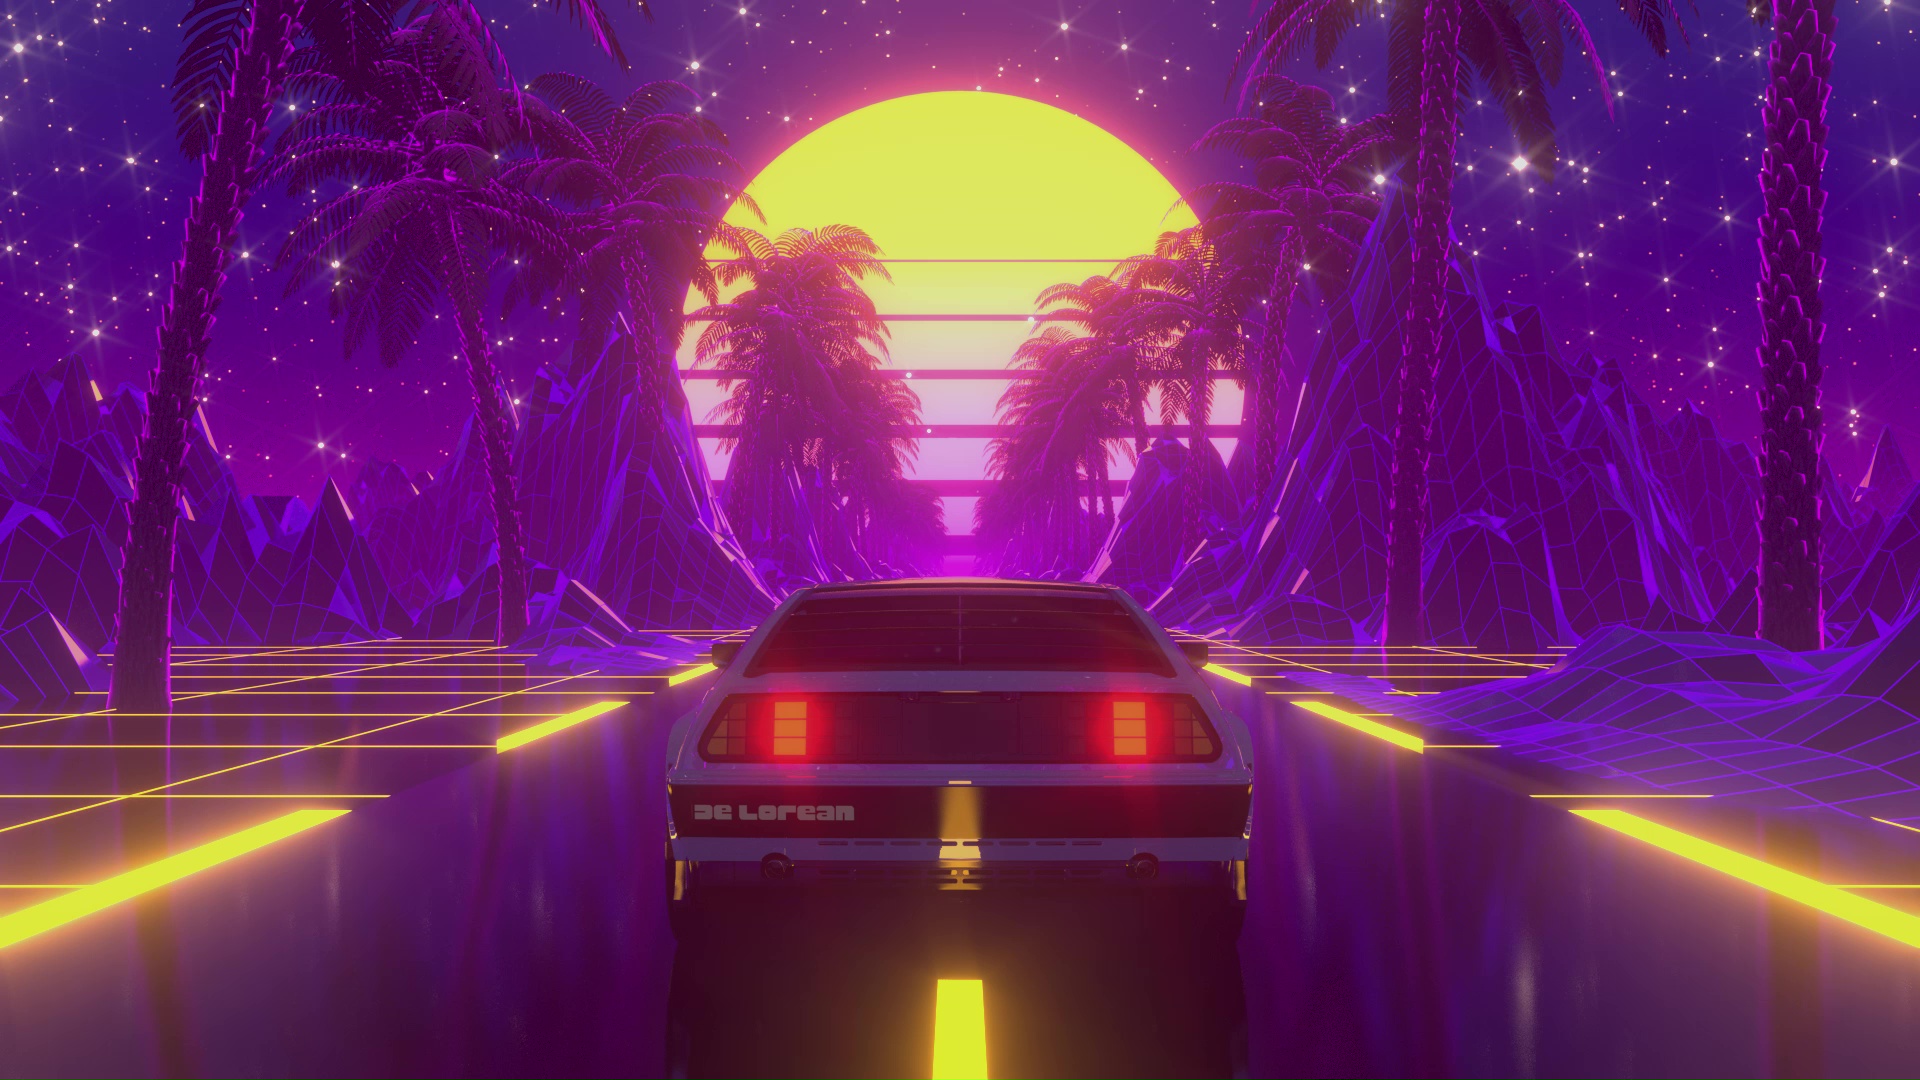 Neon Cars Live Wallpaper HD Apk Download for Android Latest version 315  comDreamNeonCarsLiveWallpaperHD